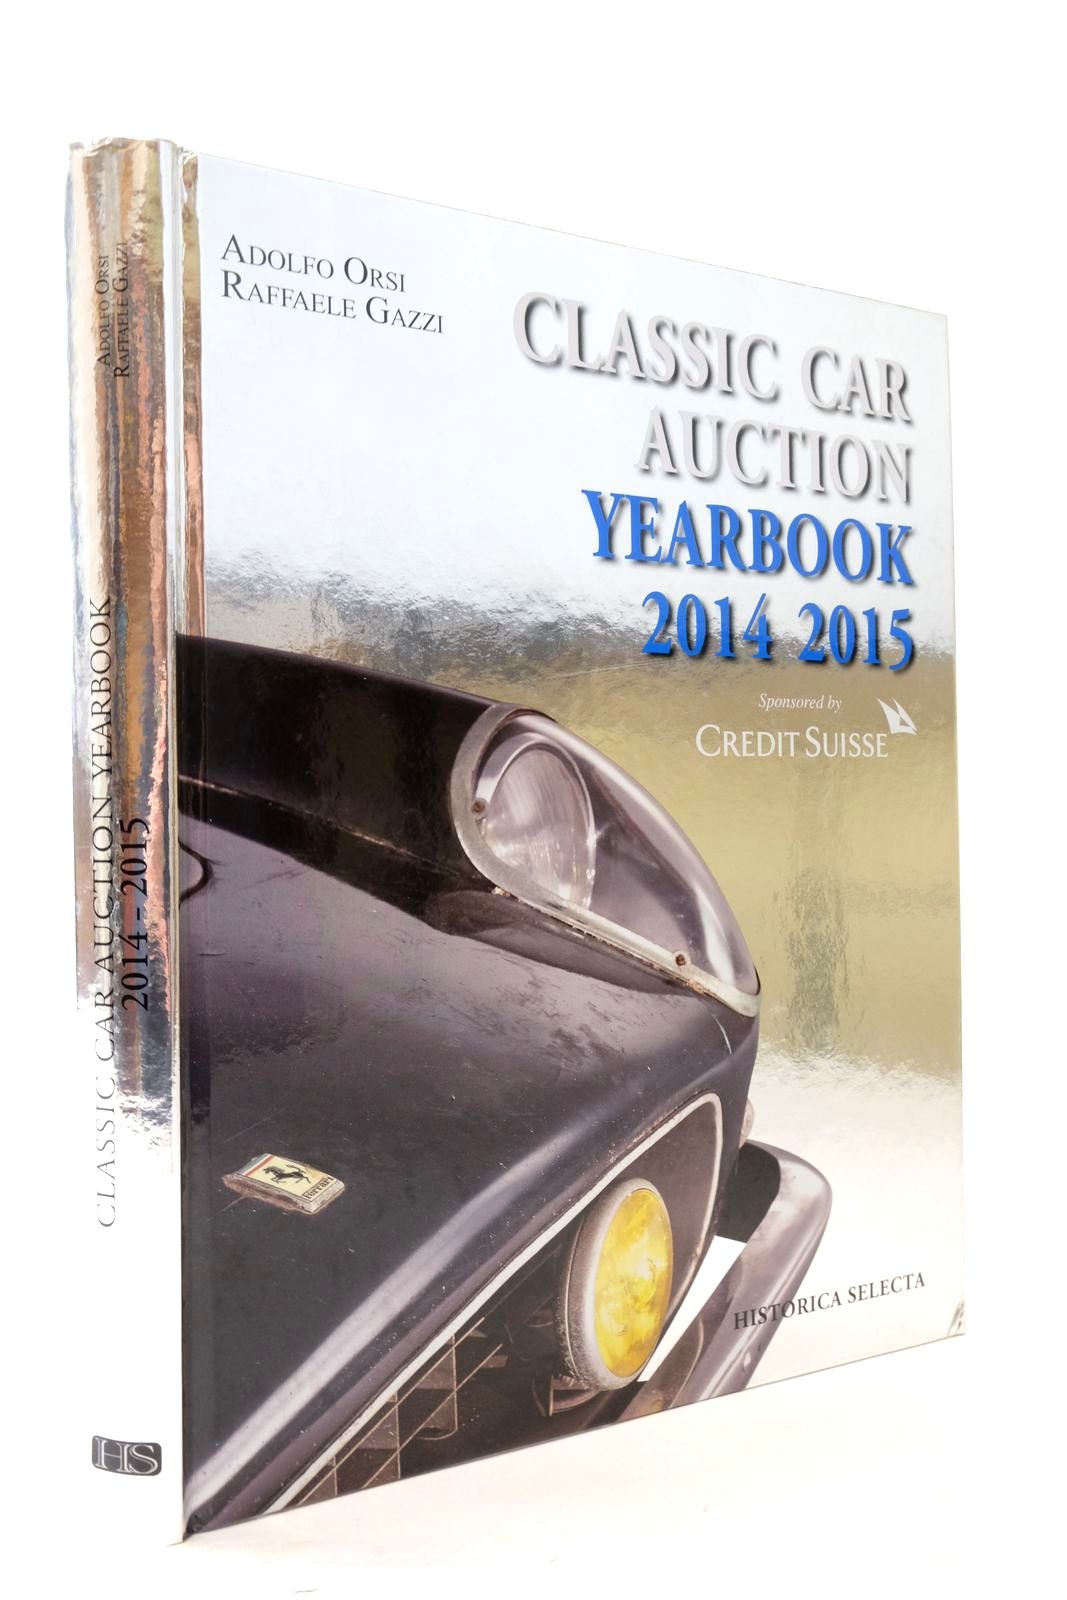 Photo of CLASSIC CAR AUCTION YEARBOOK 2014-2015 written by Orsi, Adolfo Gazzi, Raffaele published by Historica Selecta (STOCK CODE: 2136572)  for sale by Stella & Rose's Books